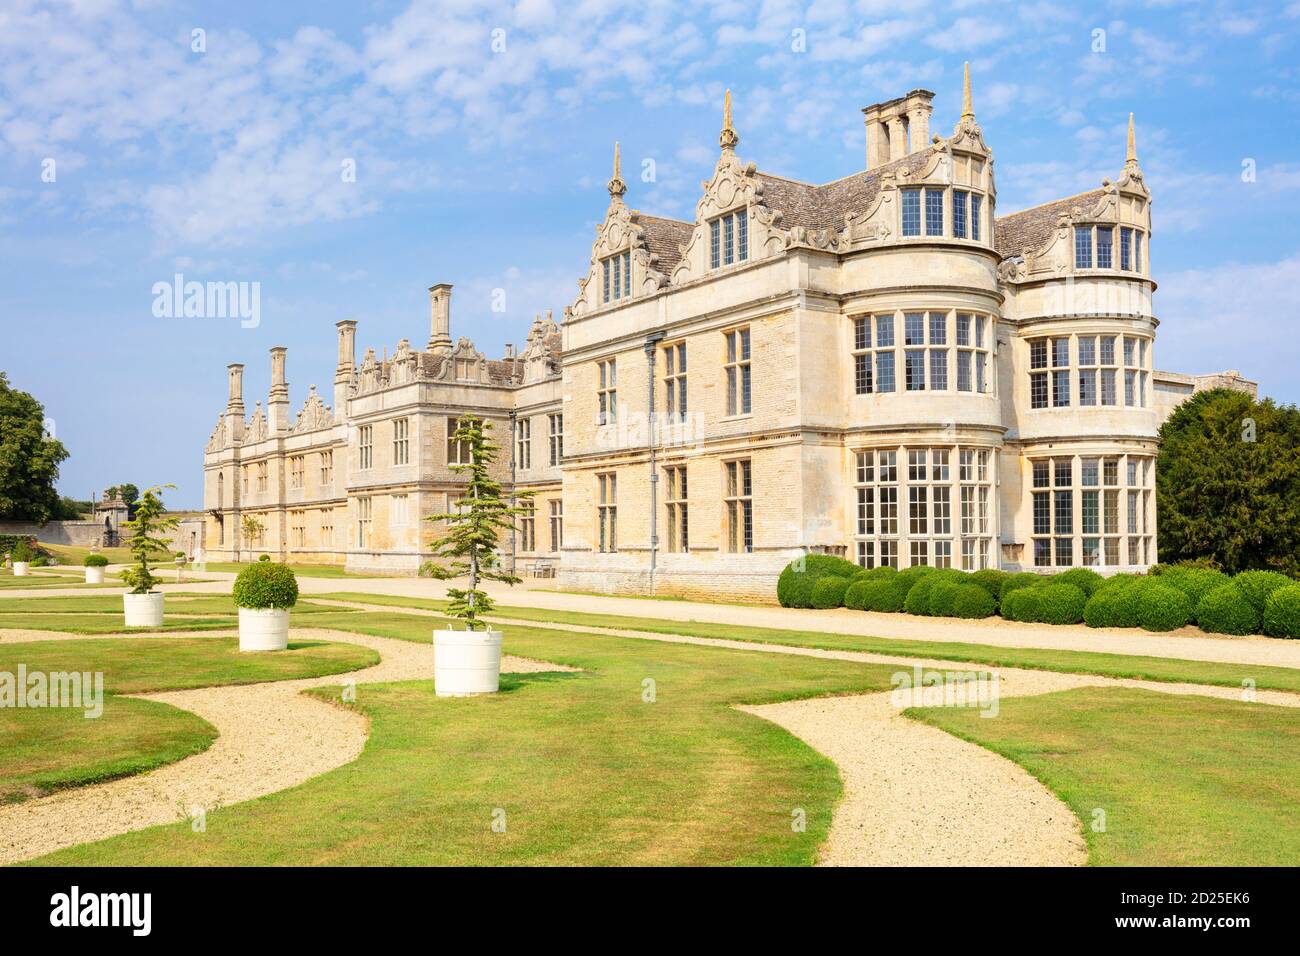 Kirby Hall a ruined 17th century Elizabethan stately home or country house near Gretton nr Corby Northamptonshire England UK GB Europe Stock Photo